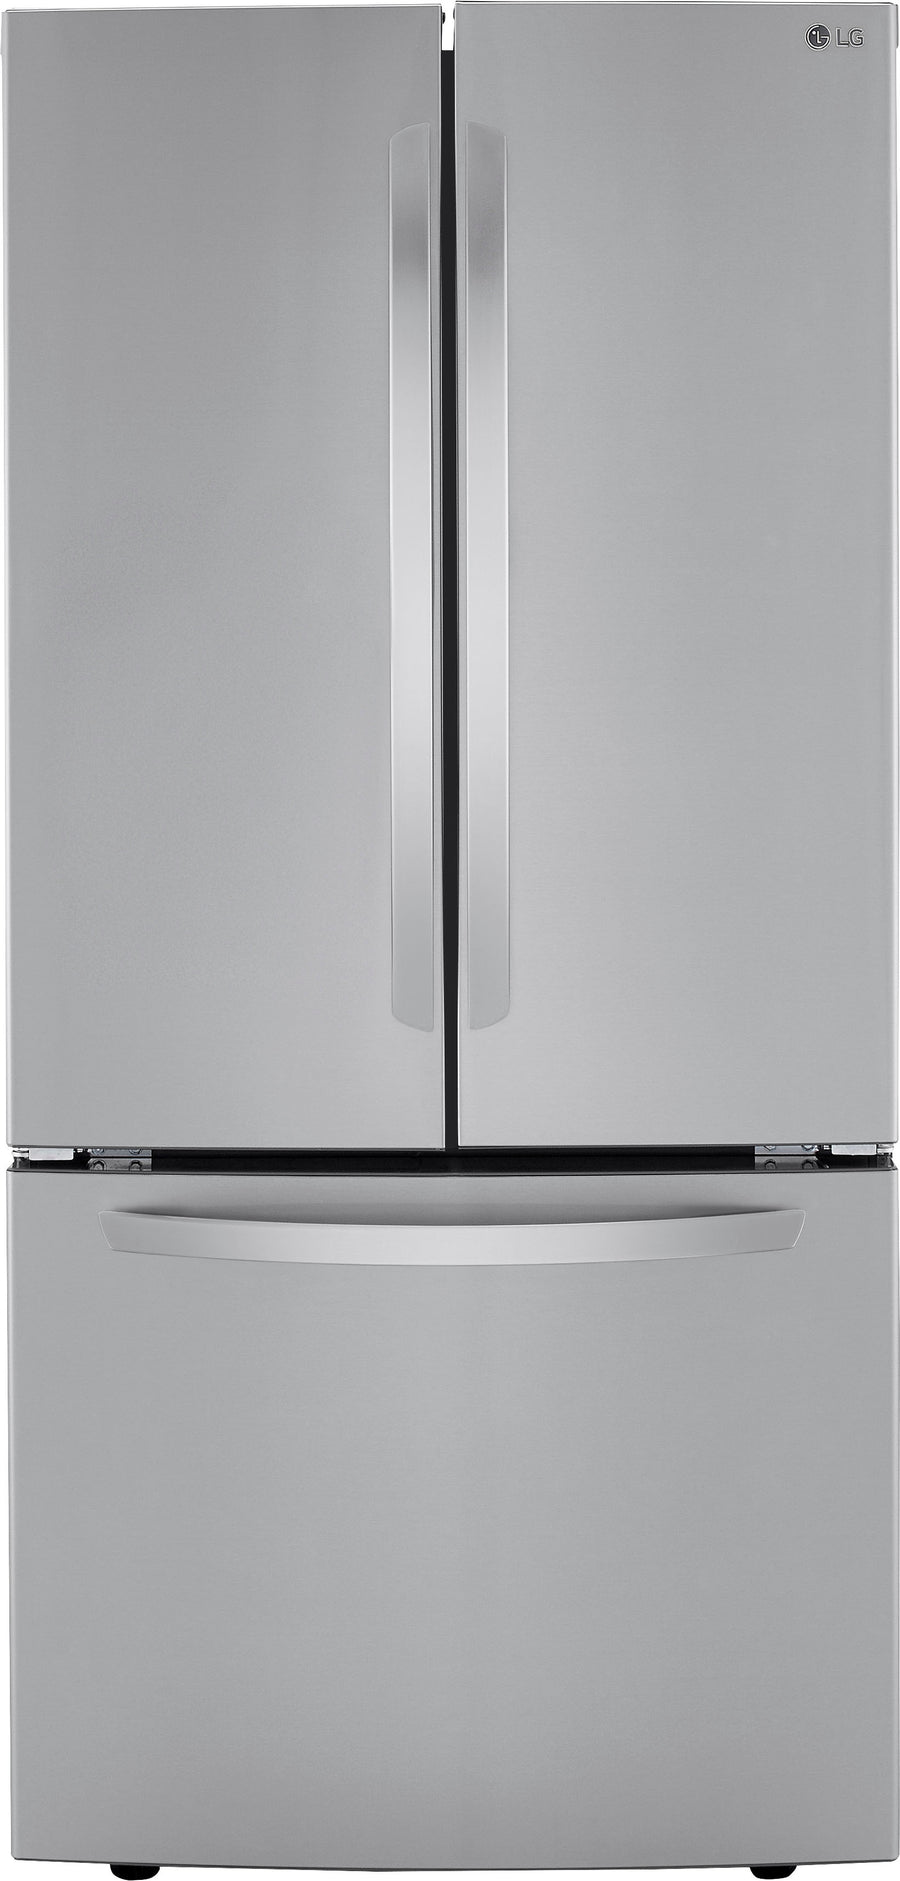 LG - 25.1 Cu. Ft. French Door Refrigerator with Ice Maker - Stainless steel_0